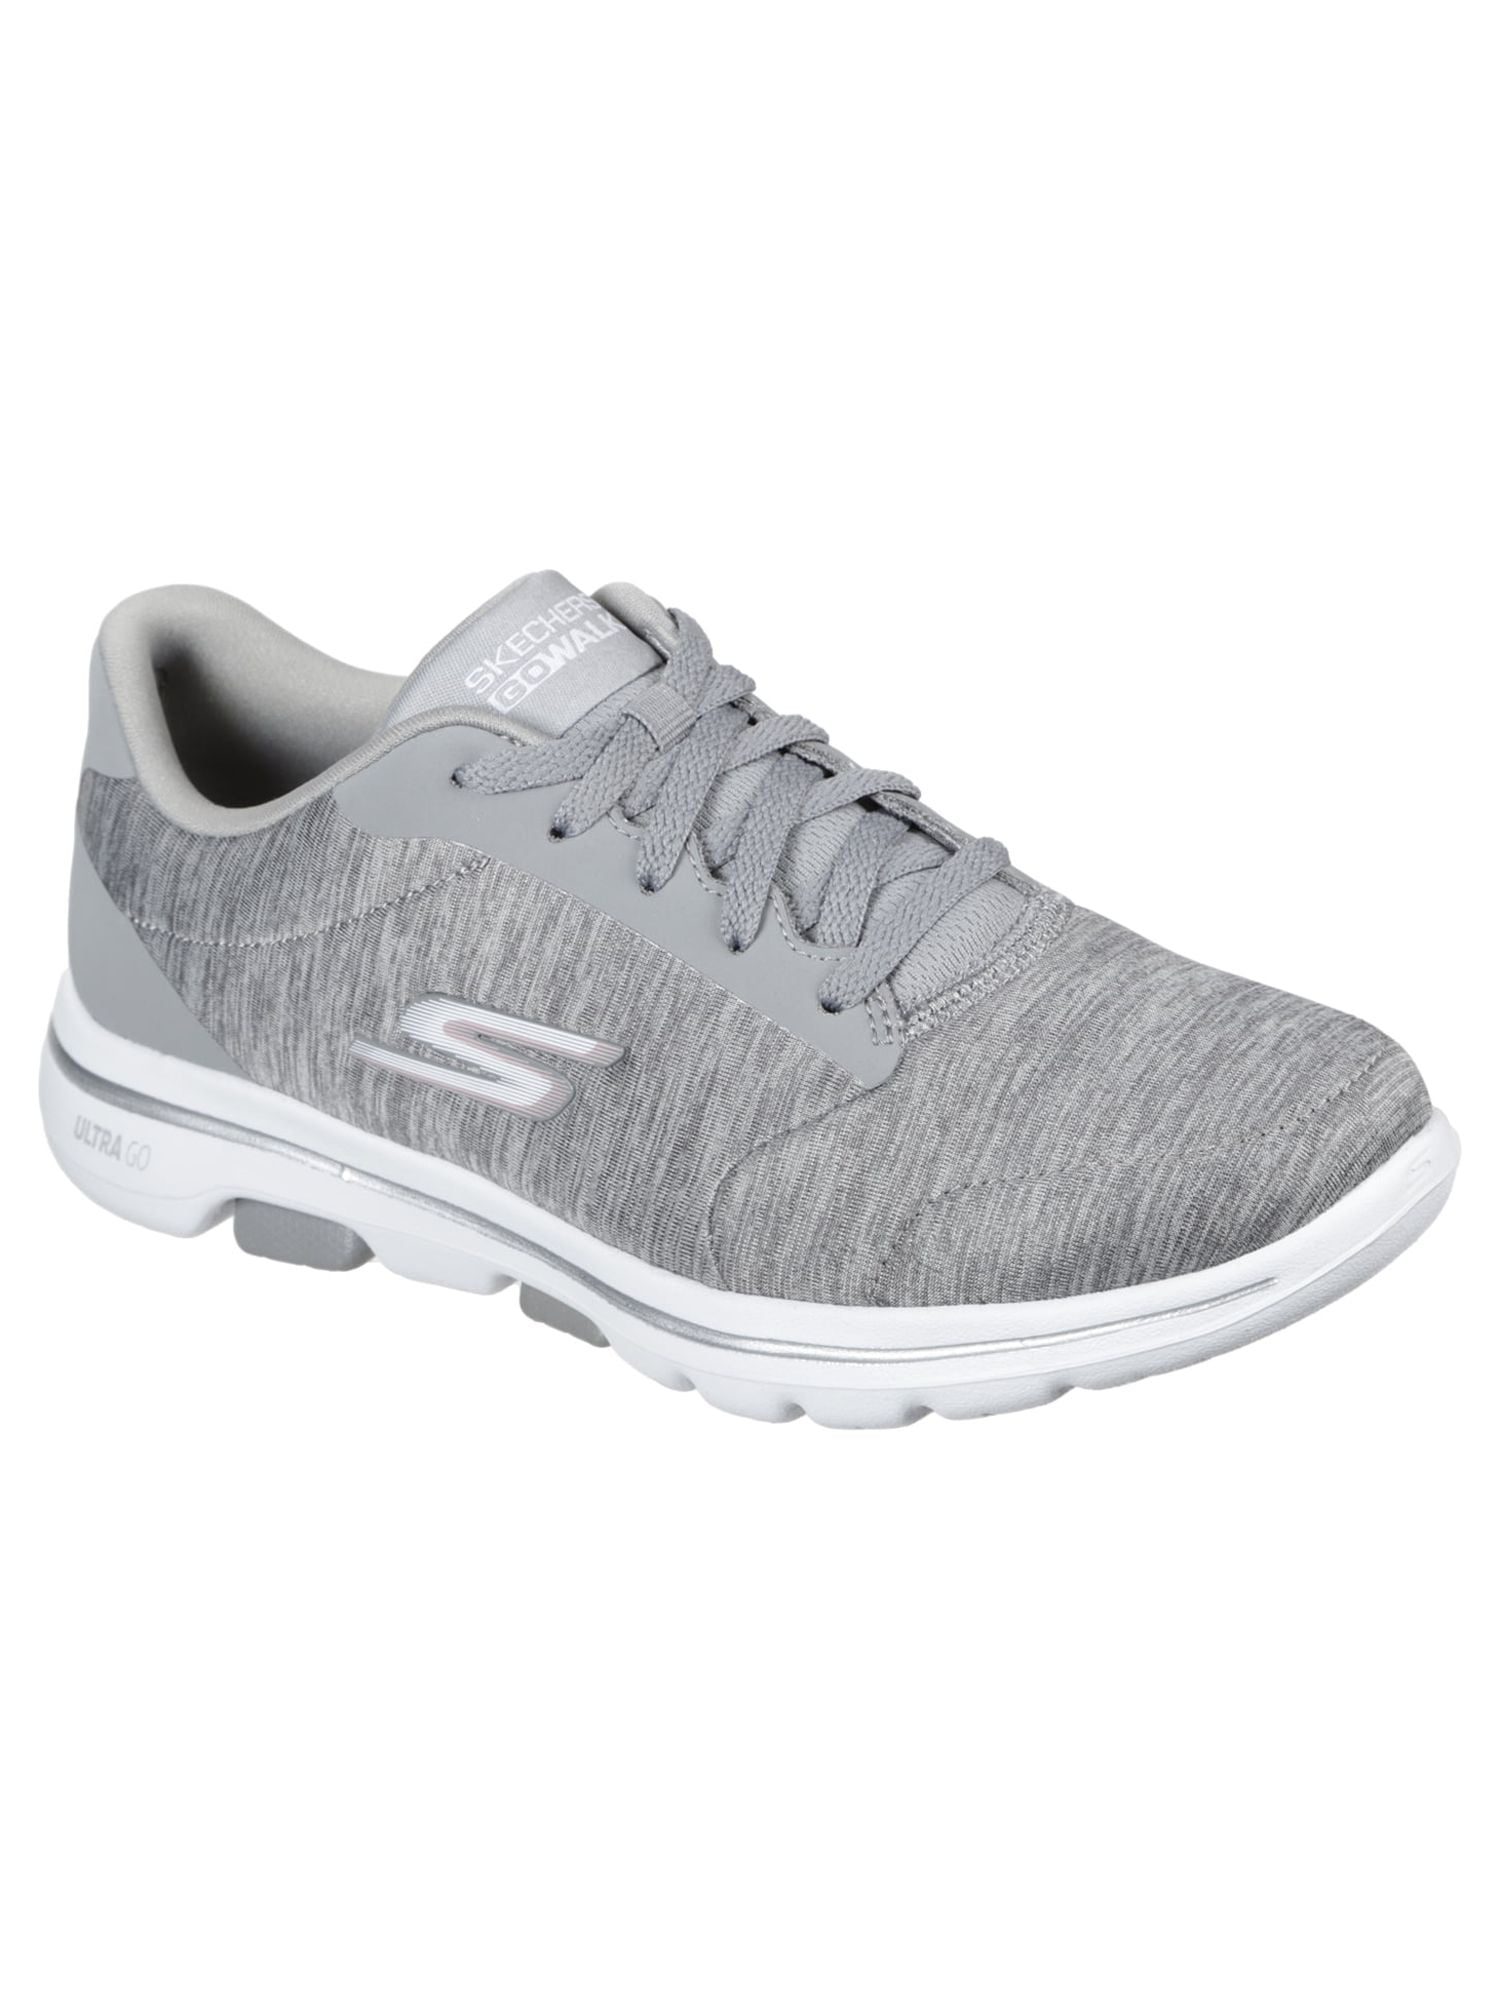 Skechers Mens GO WALK 3 - CHARGE US 10 NAVY, GREY [53988] in Delhi at best  price by Shoe Matic - Justdial